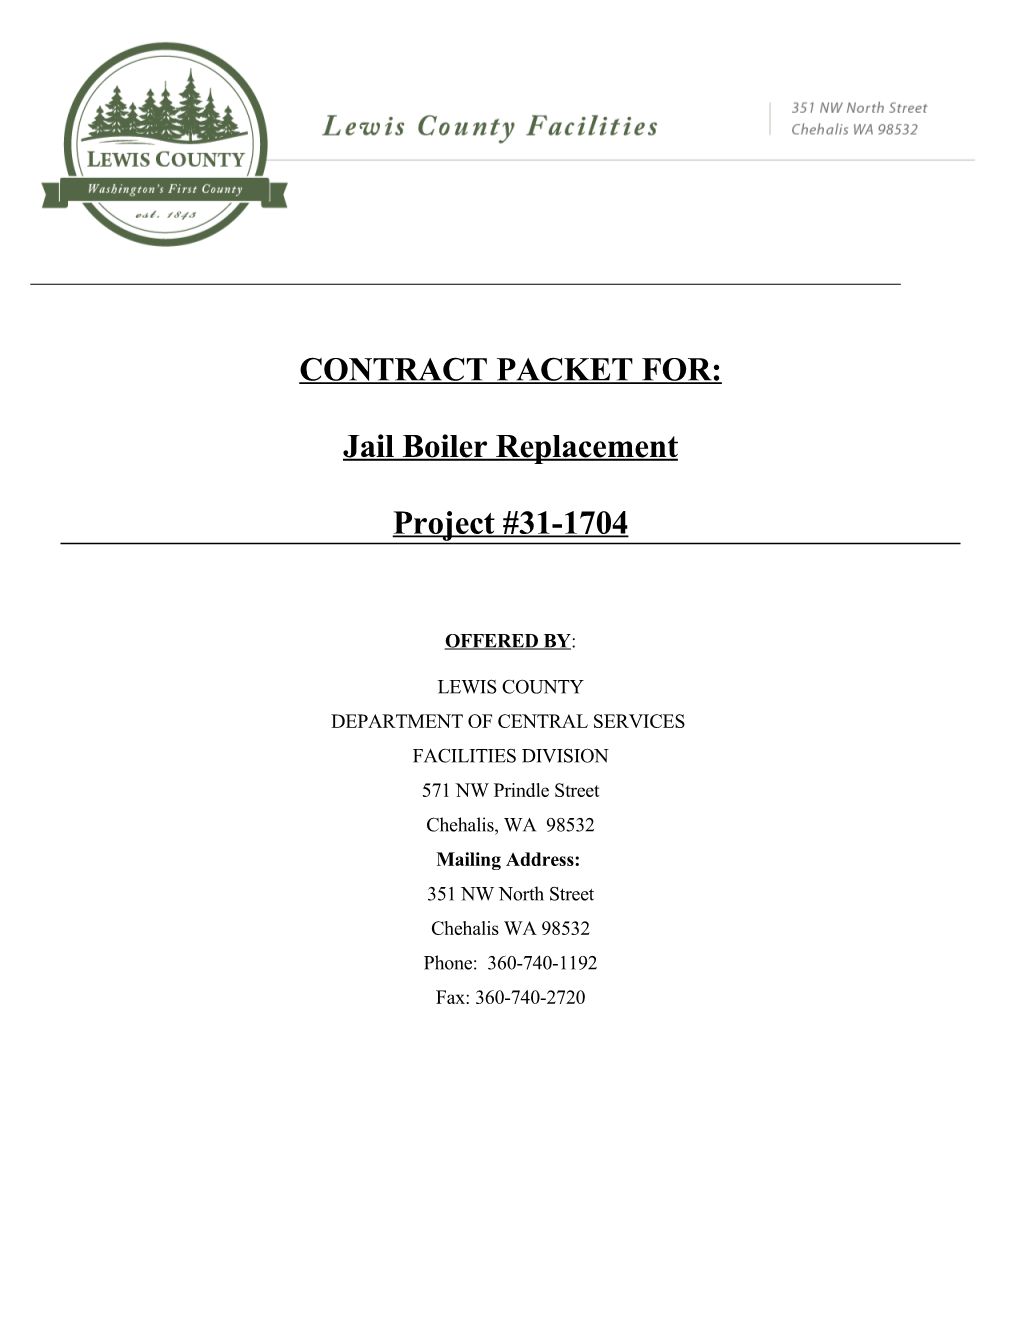 Contract Packet For